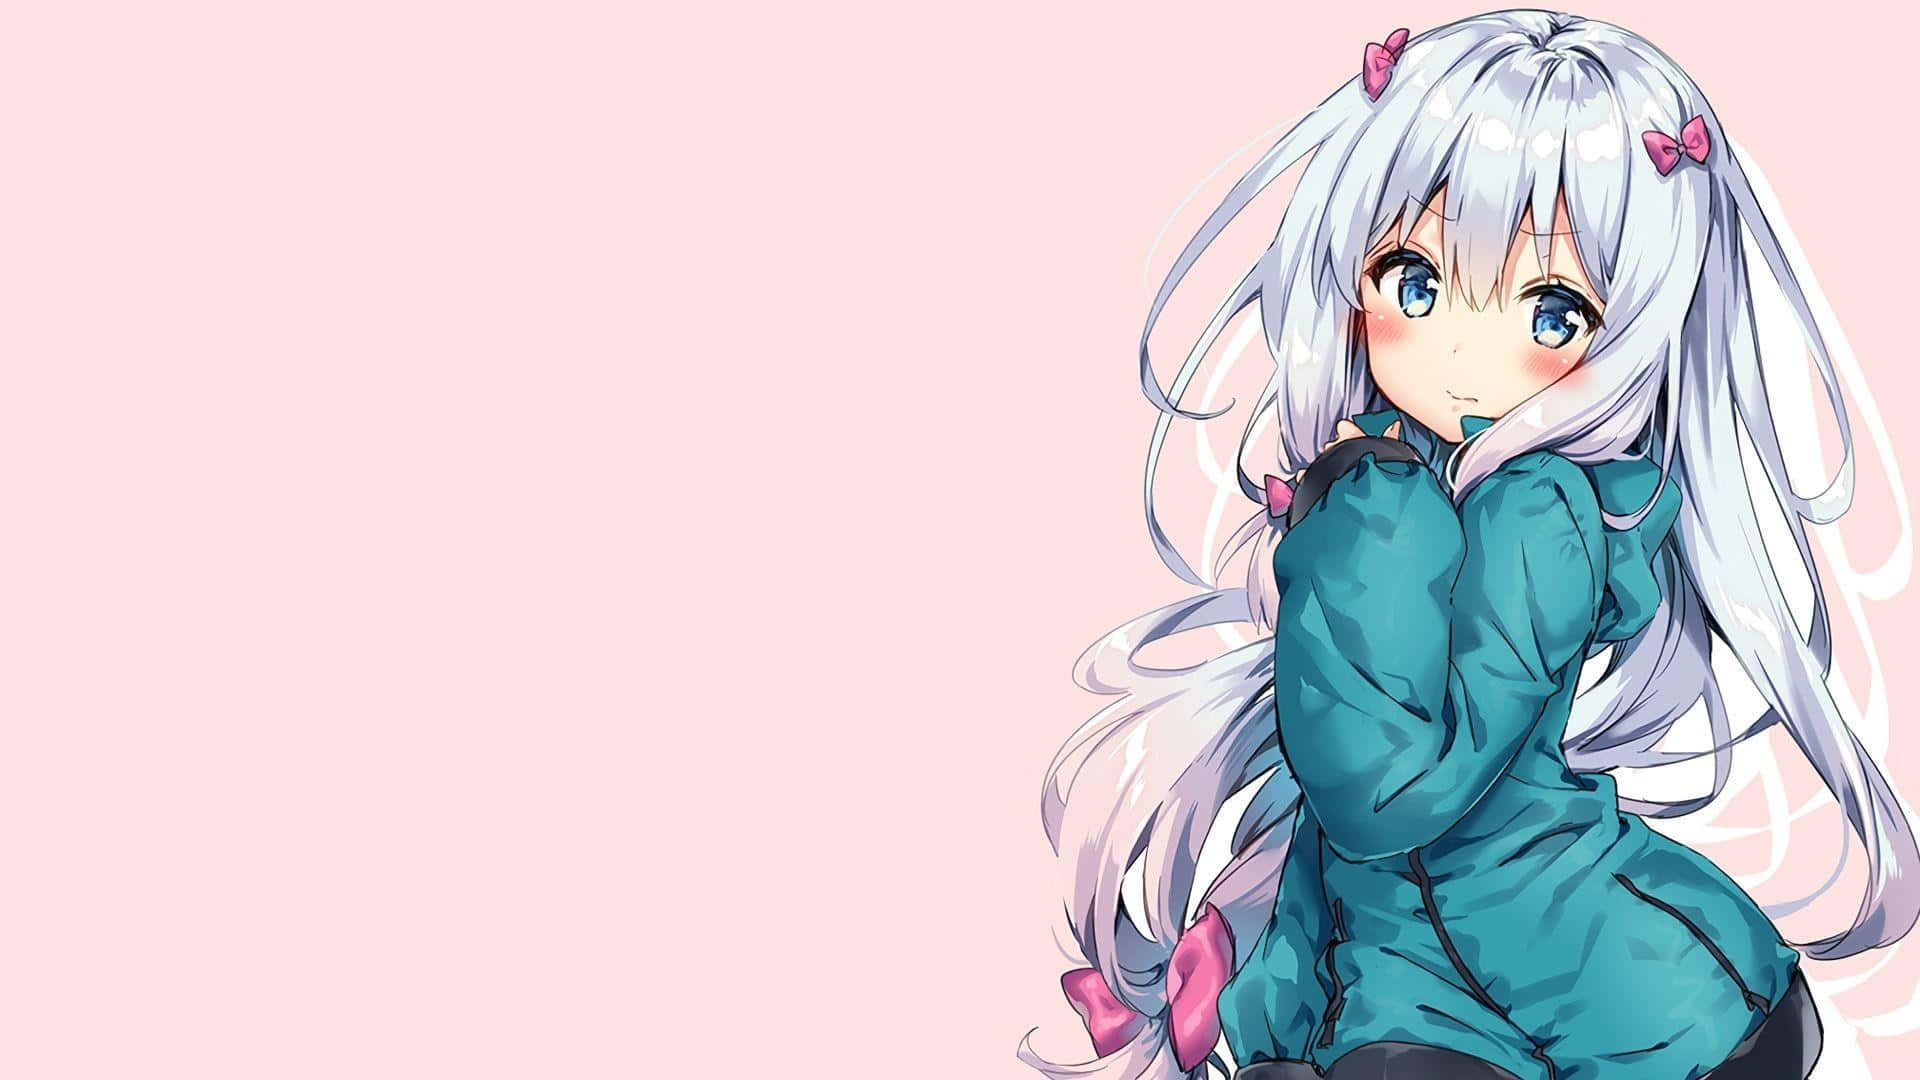 A cute Kawaii Anime Girl smiling with her eyes closed Wallpaper